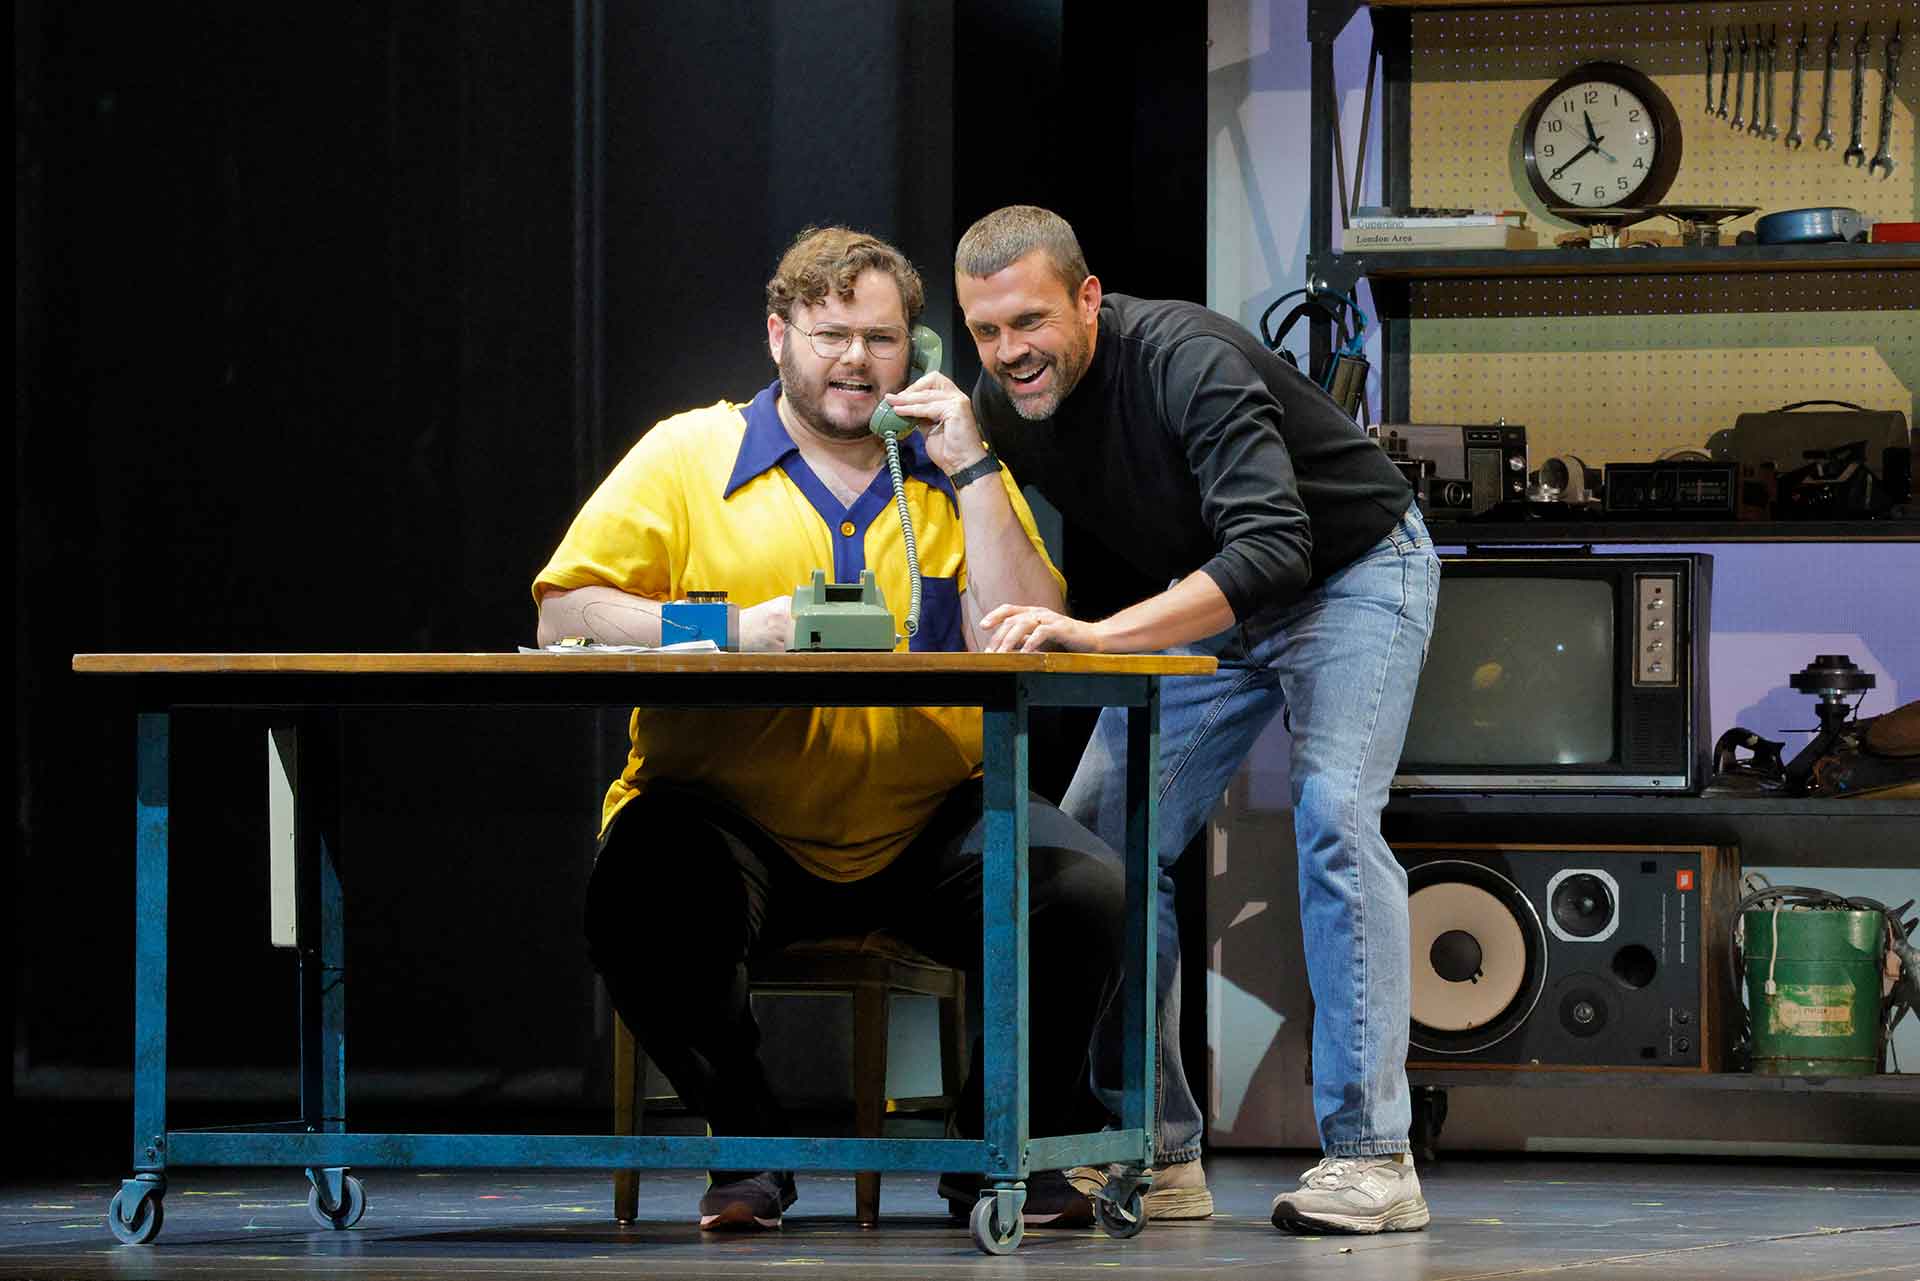 A man in a black turtleneck and jeans plays on a rotary phone with a man in scruffy hair, beard and yellow shirt at a workbench